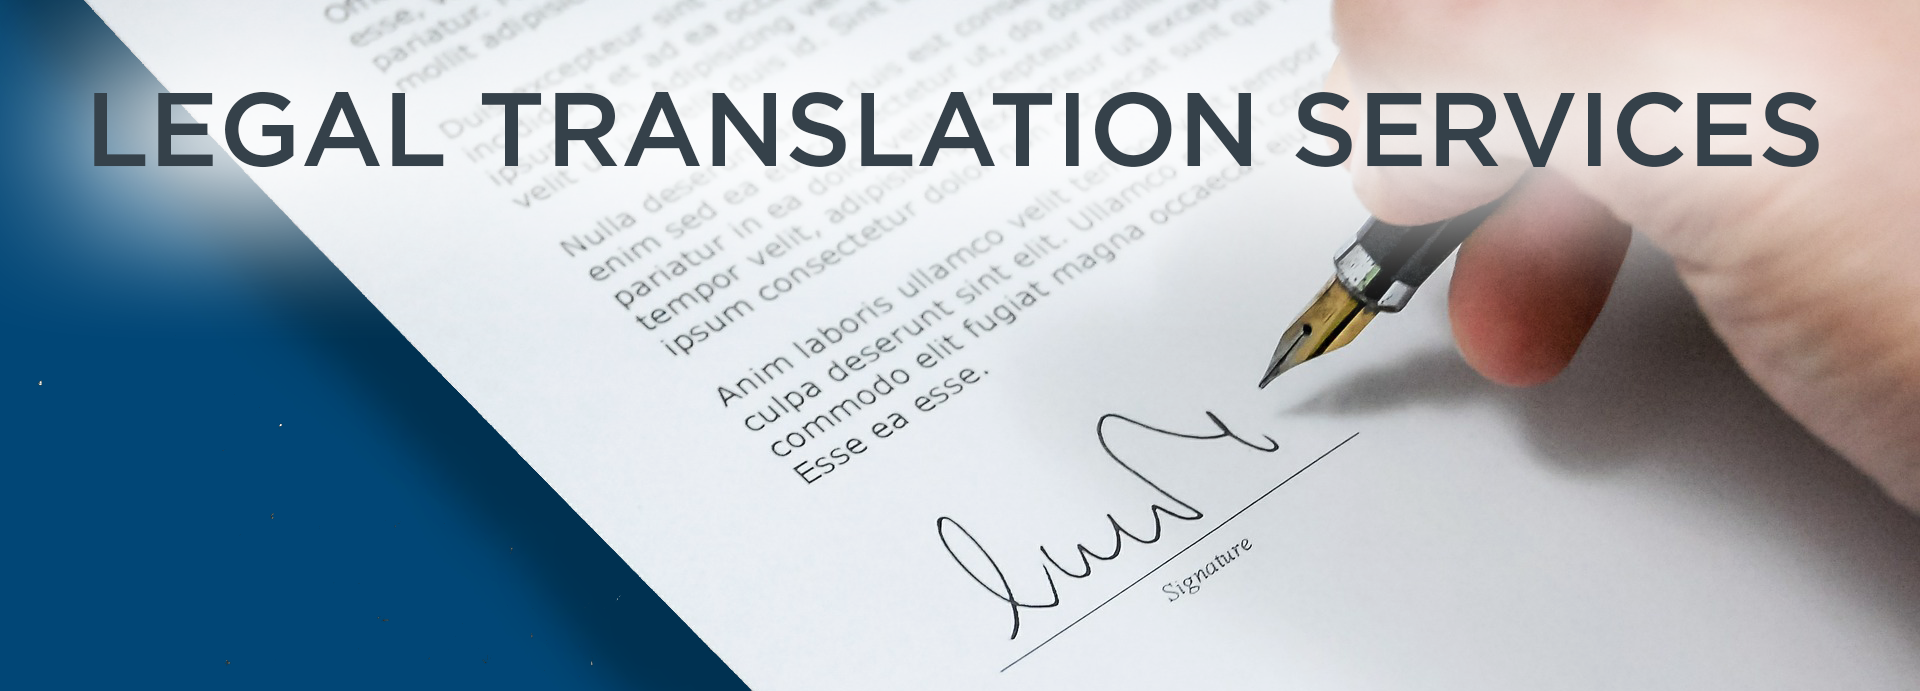 Where Can You, And Should You, Outsource Legal Translation Services?